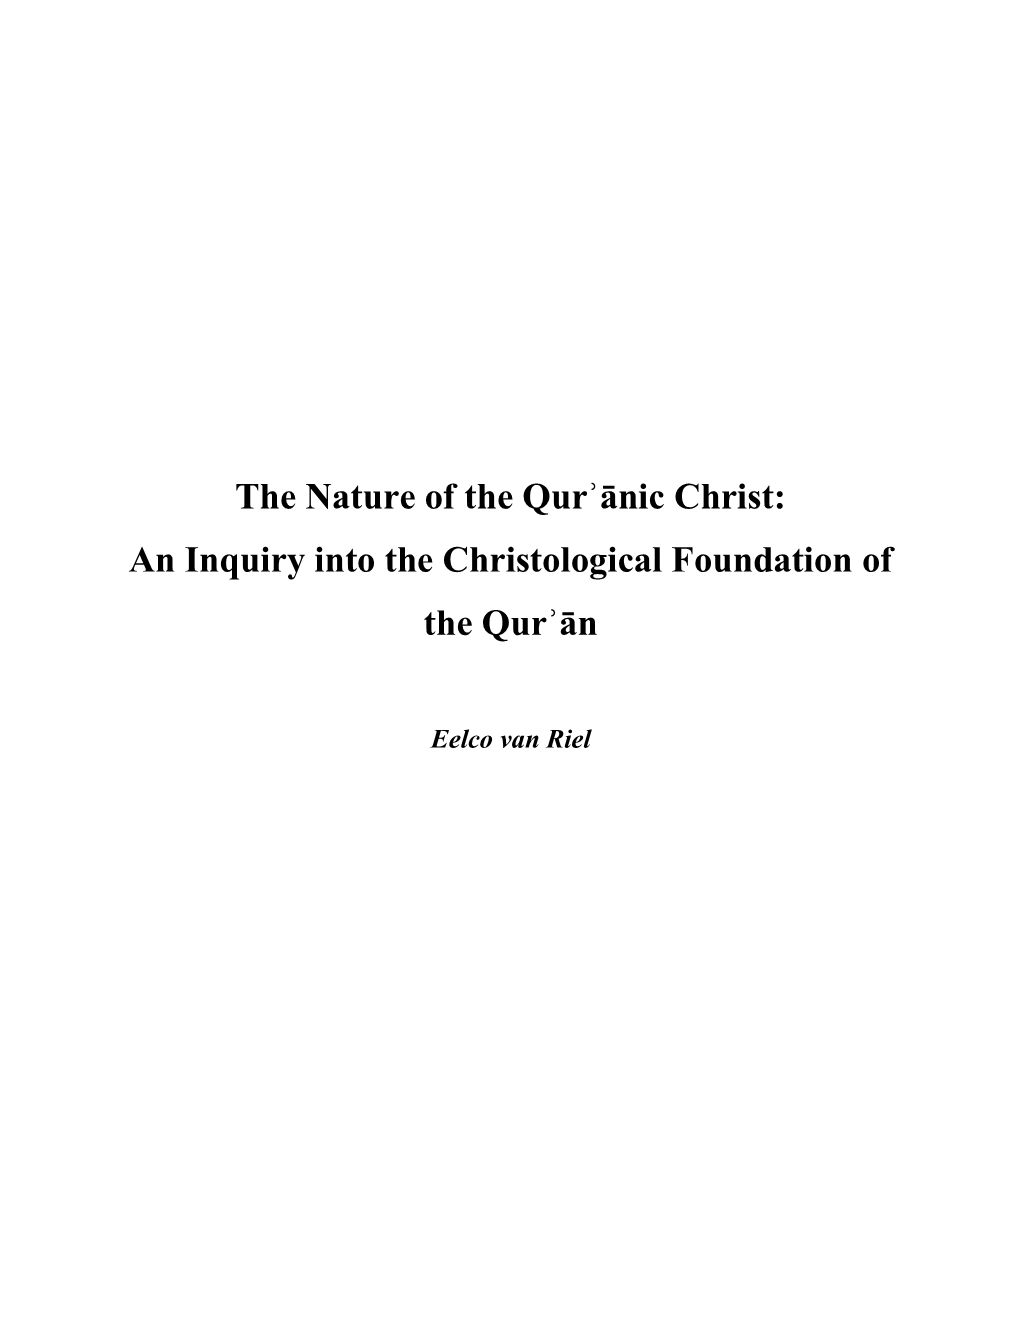 The Nature of the Qurʾānic Christ: an Inquiry Into the Christological Foundation of the Qurʾān